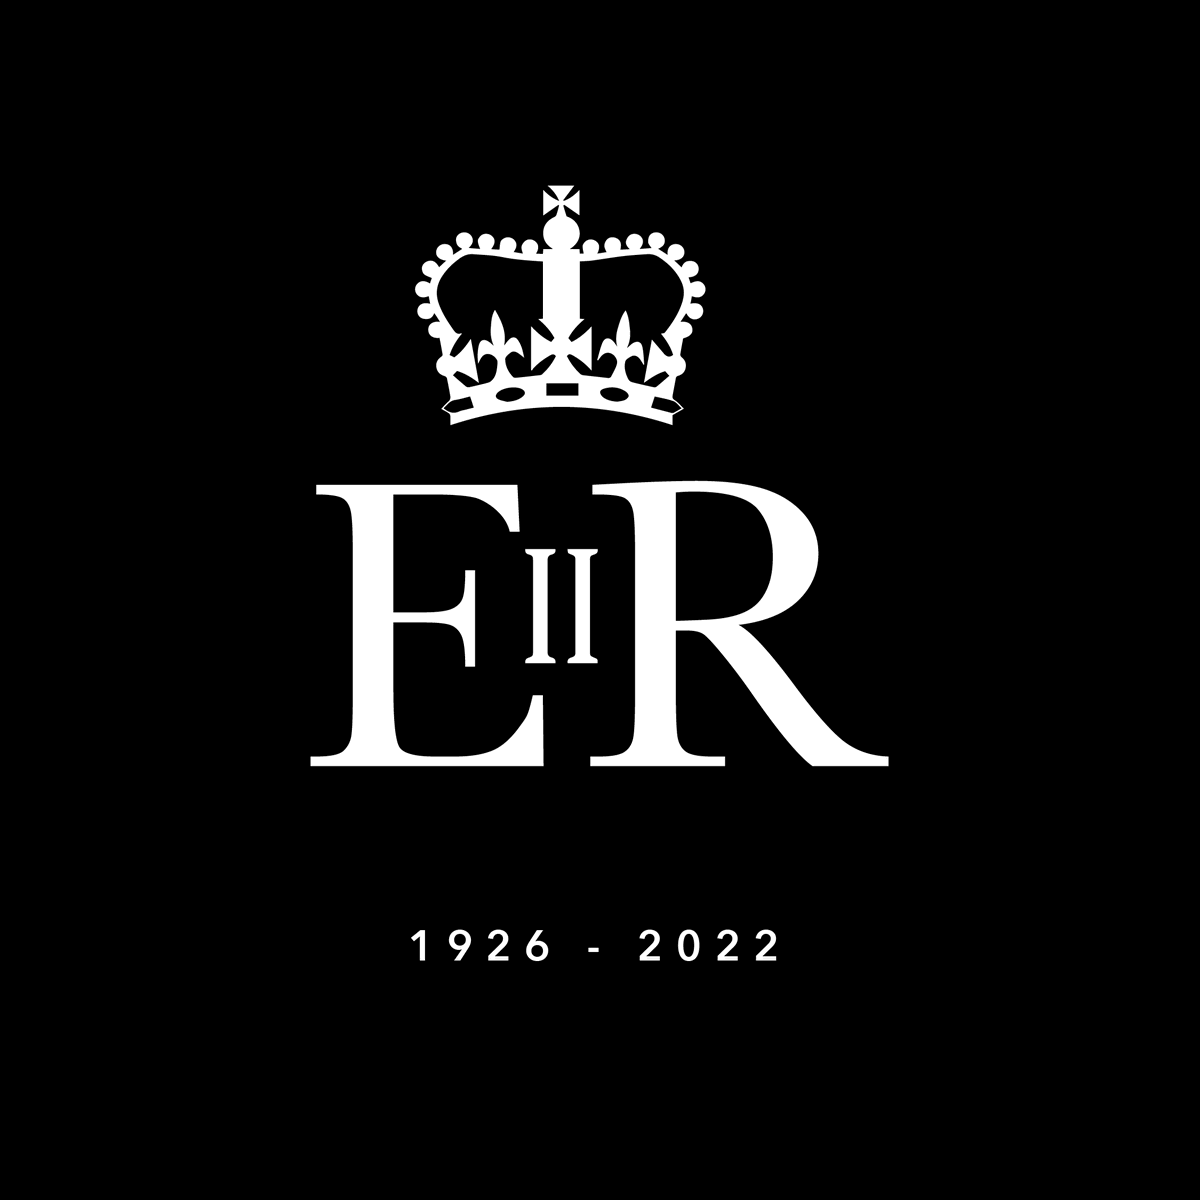 We are deeply saddened to learn about the death of Her Majesty Queen Elizabeth. She will be greatly missed and the impact her reign has had will not be forgotten. Her life has been dedicated to serving this nation, and the people within it. May she rest in peace.